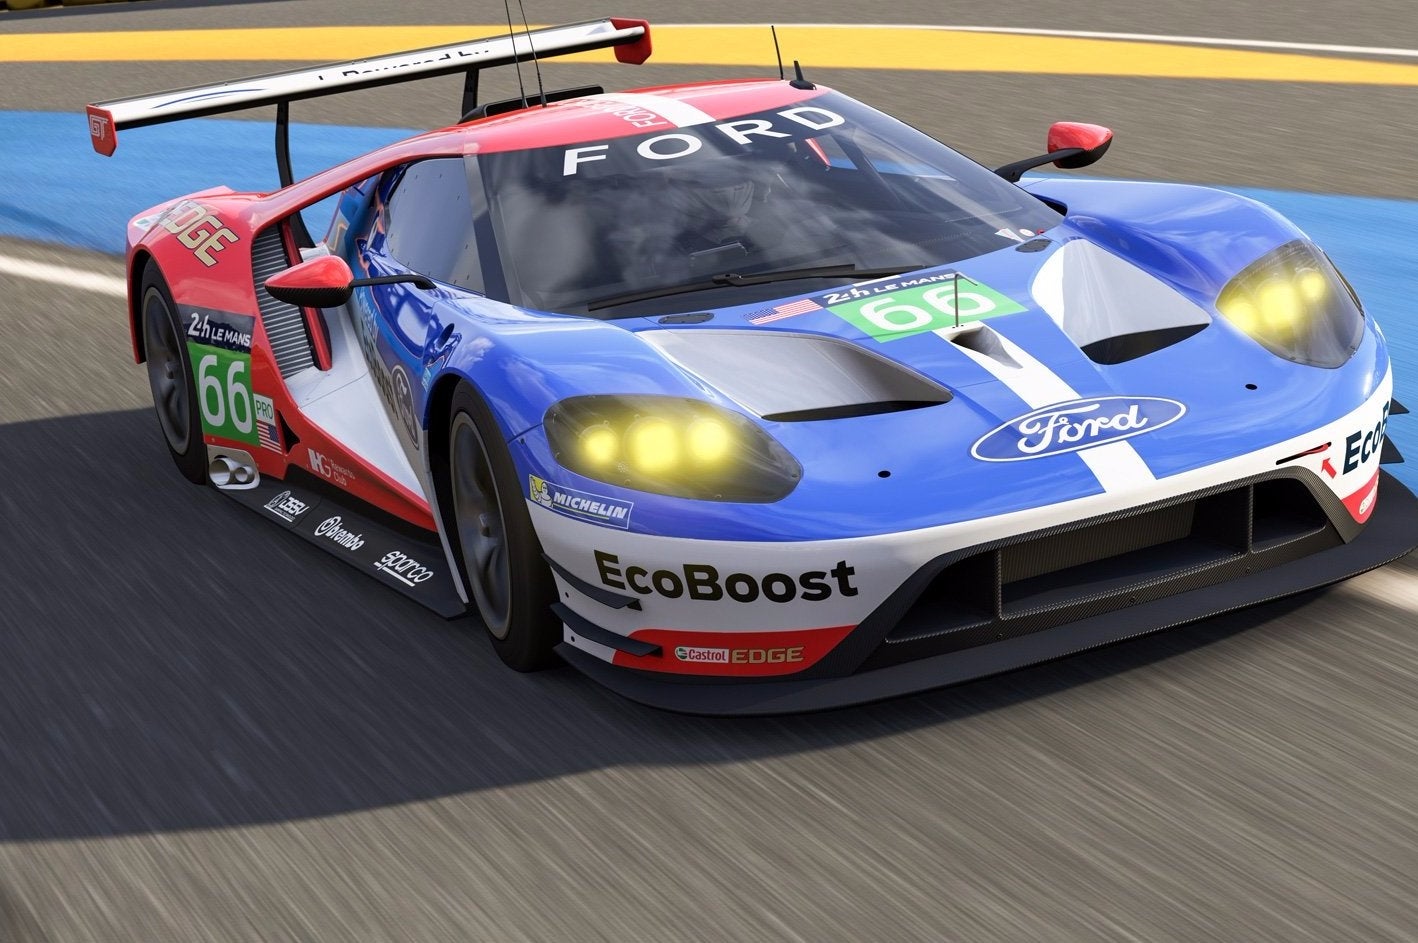 Image for Forza 6 is getting its own online championship